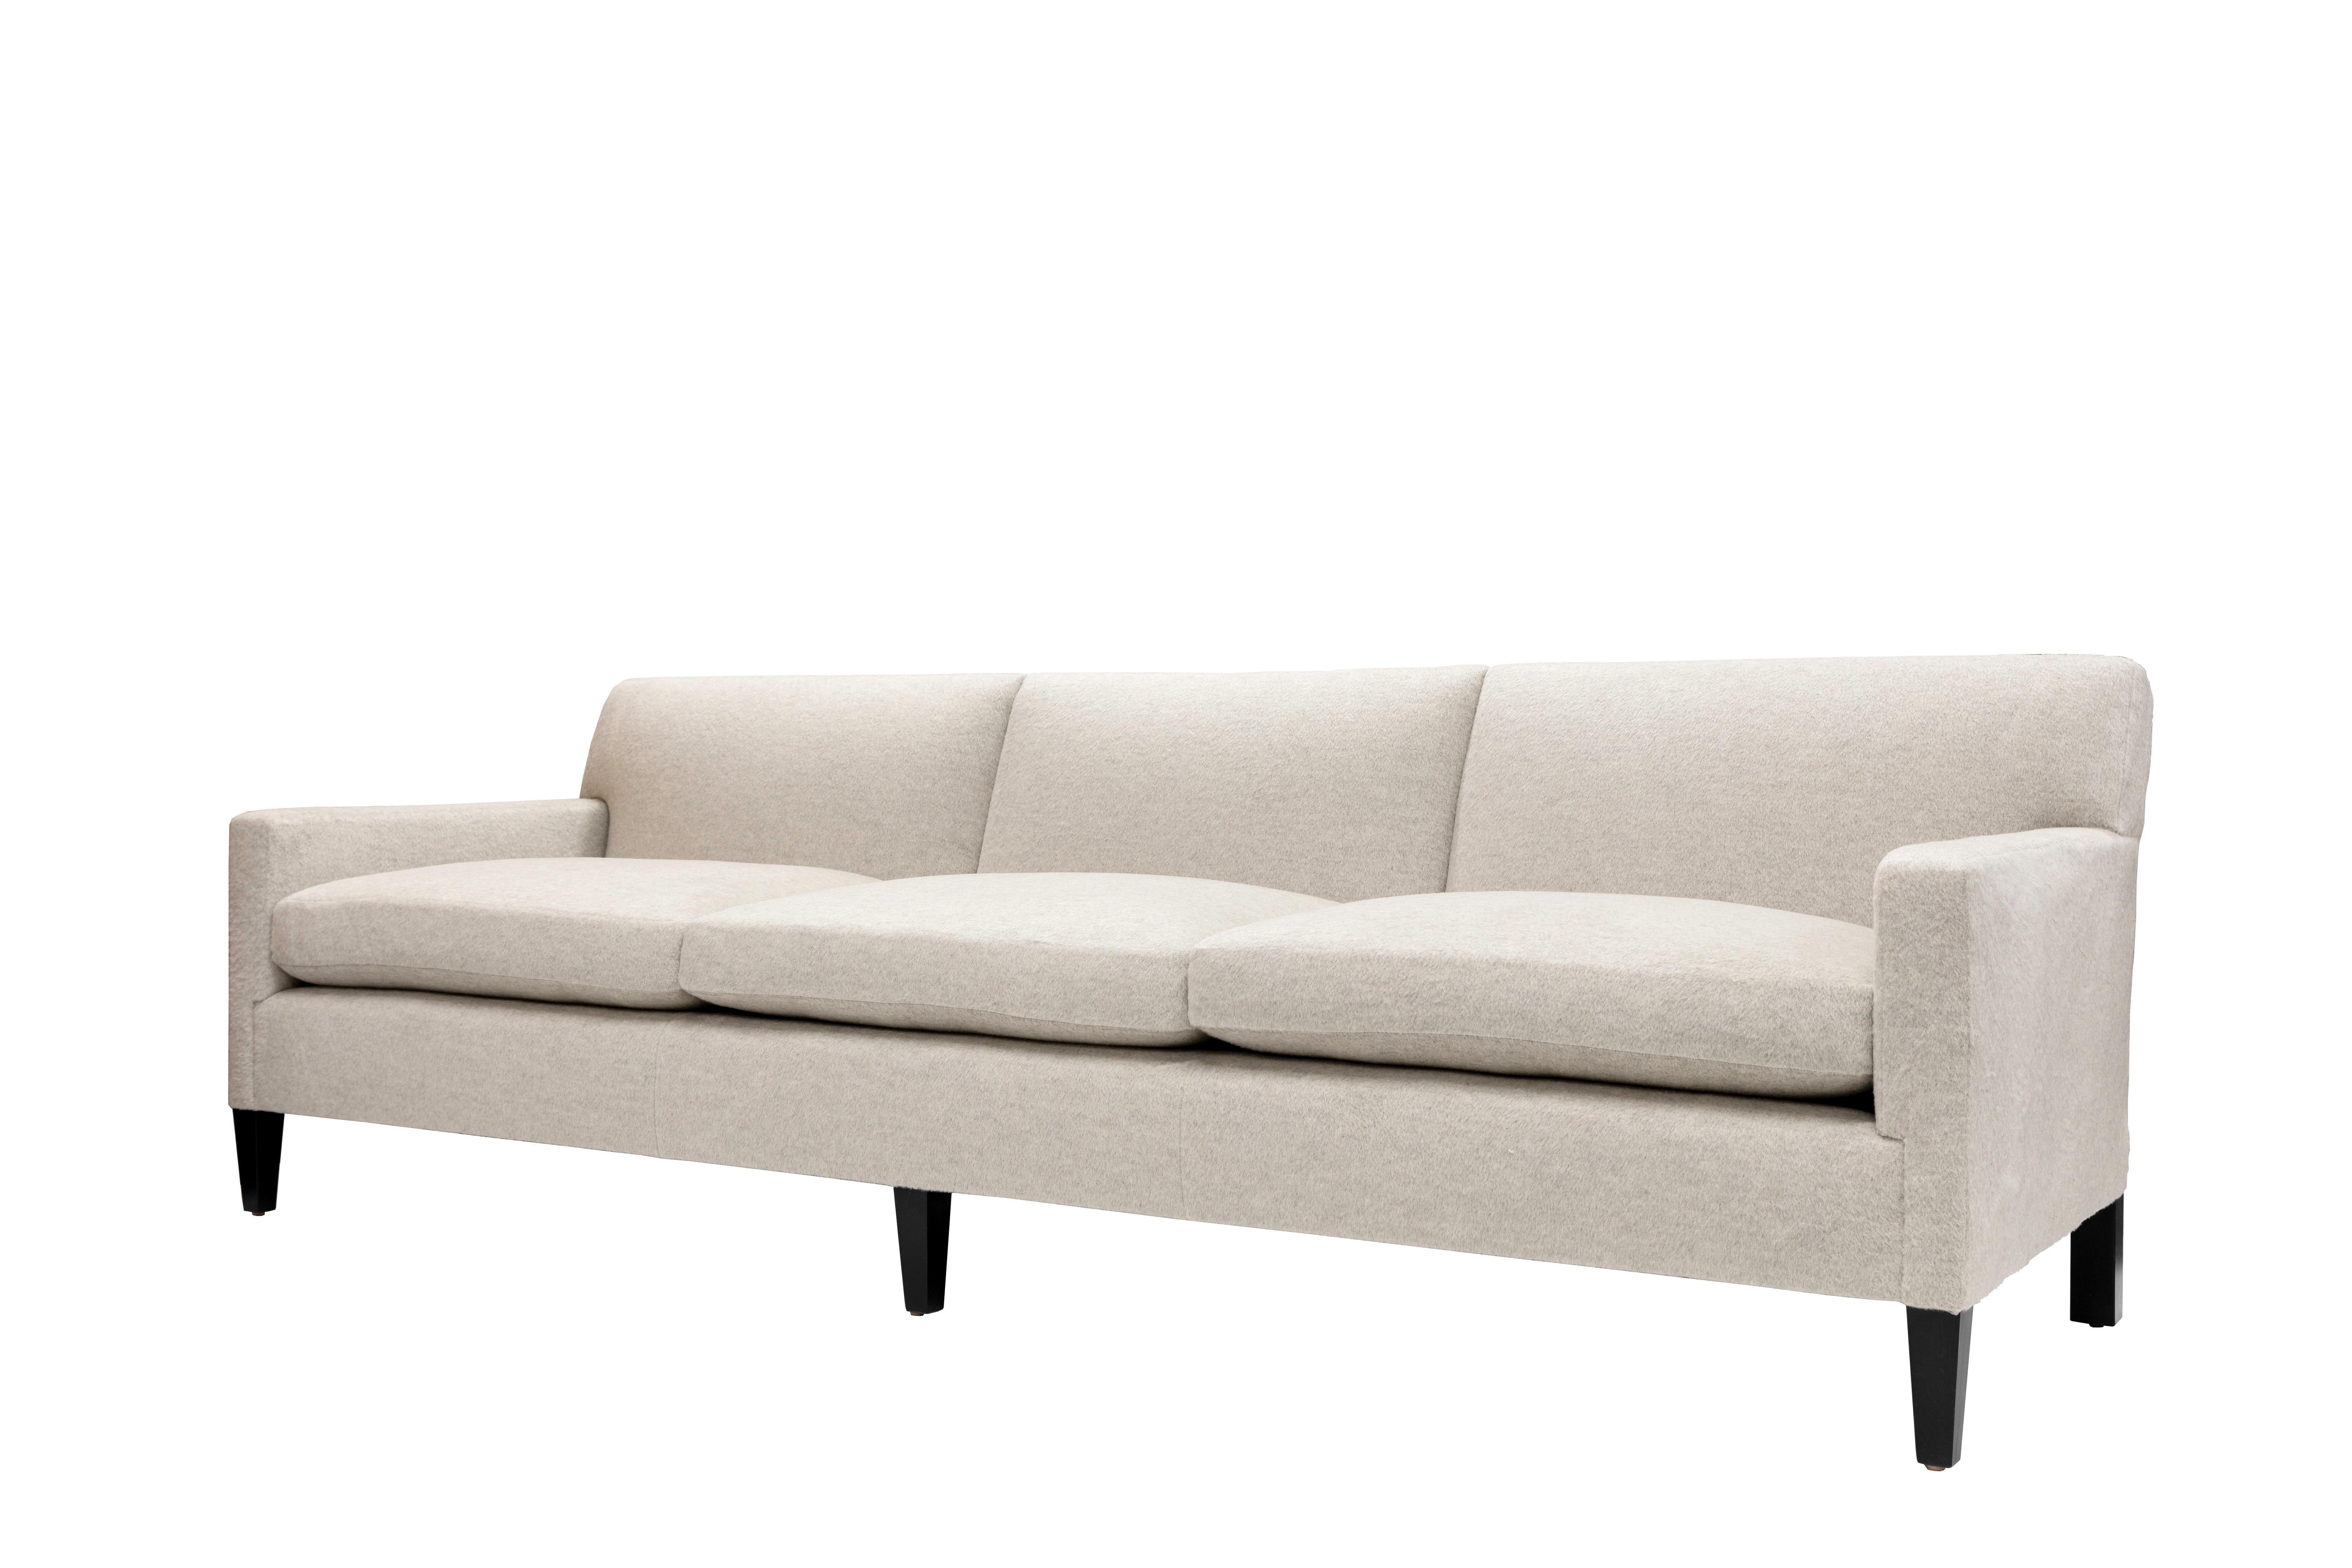 The Union Sofa has a tight upholstered back with three loose seat cushions. Tapered front legs and squared back legs are made of blackened hardwood.

The Union Sofa is a made to order item and hand crafted in the USA. 
Customer's own material is